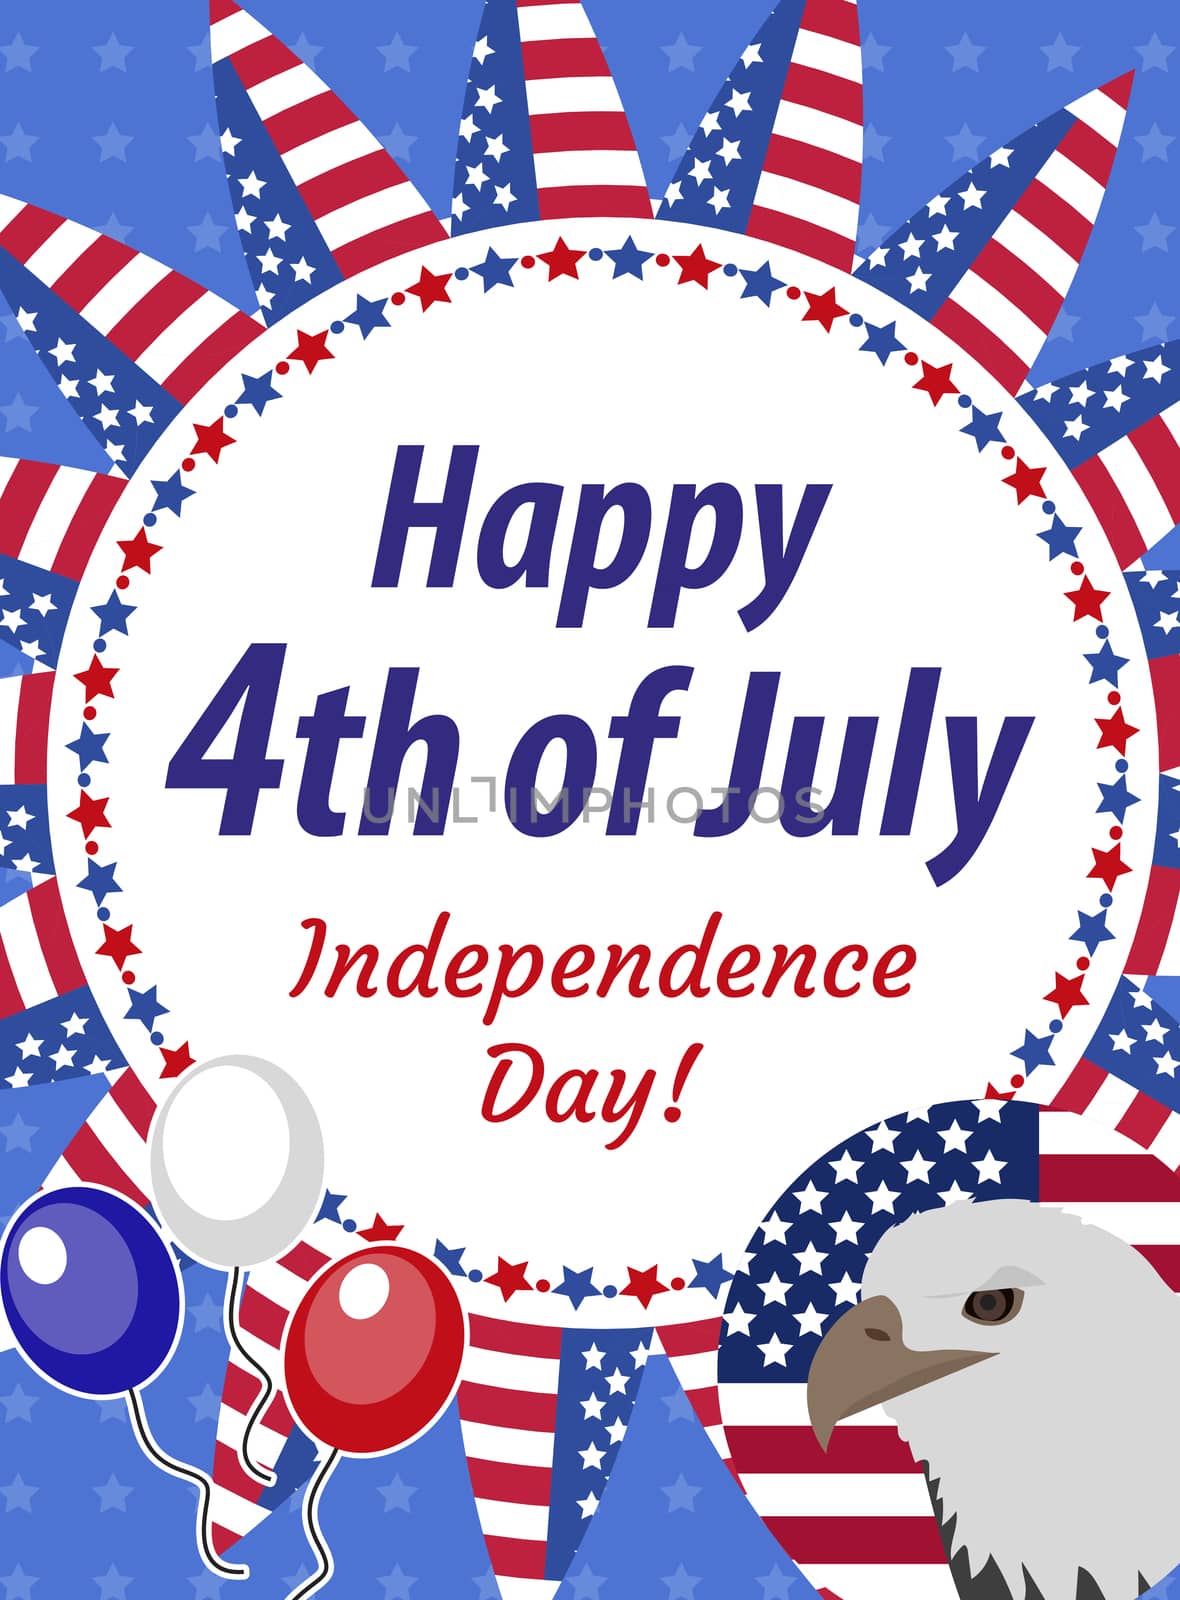 Happy 4th july greeting card, poster. American Independence Day template for your design. illustration.